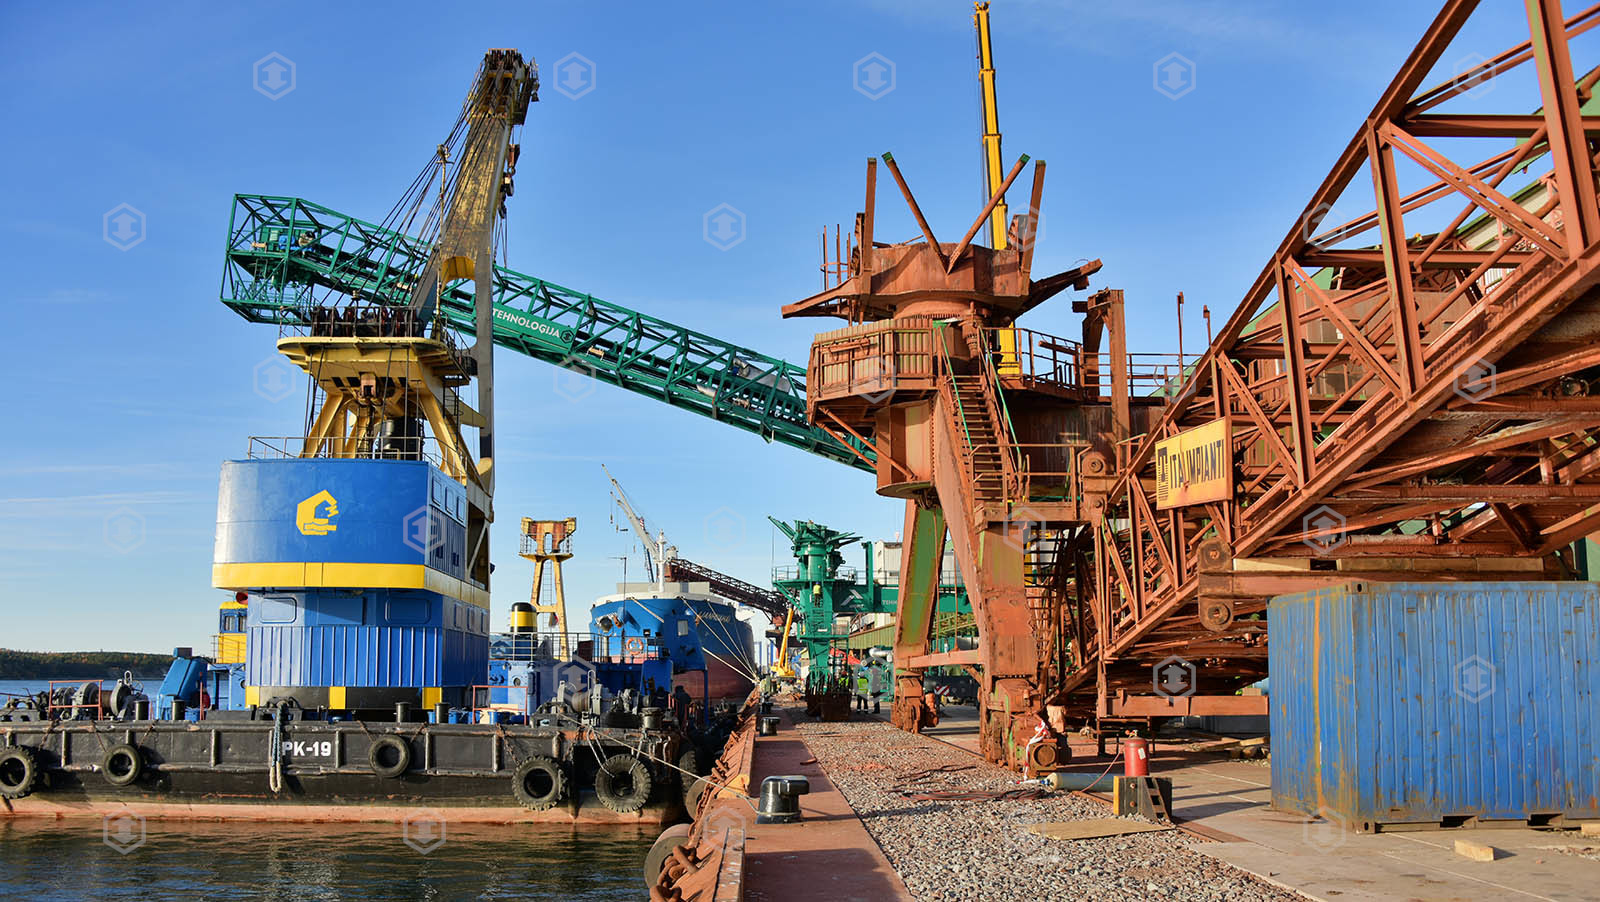 Dismantling of the old shiploader and assembly of new equipment. Project delivered for Lithuanian company "Biriu Kroviniu Terminalas" at port Klaipeda in 2015.